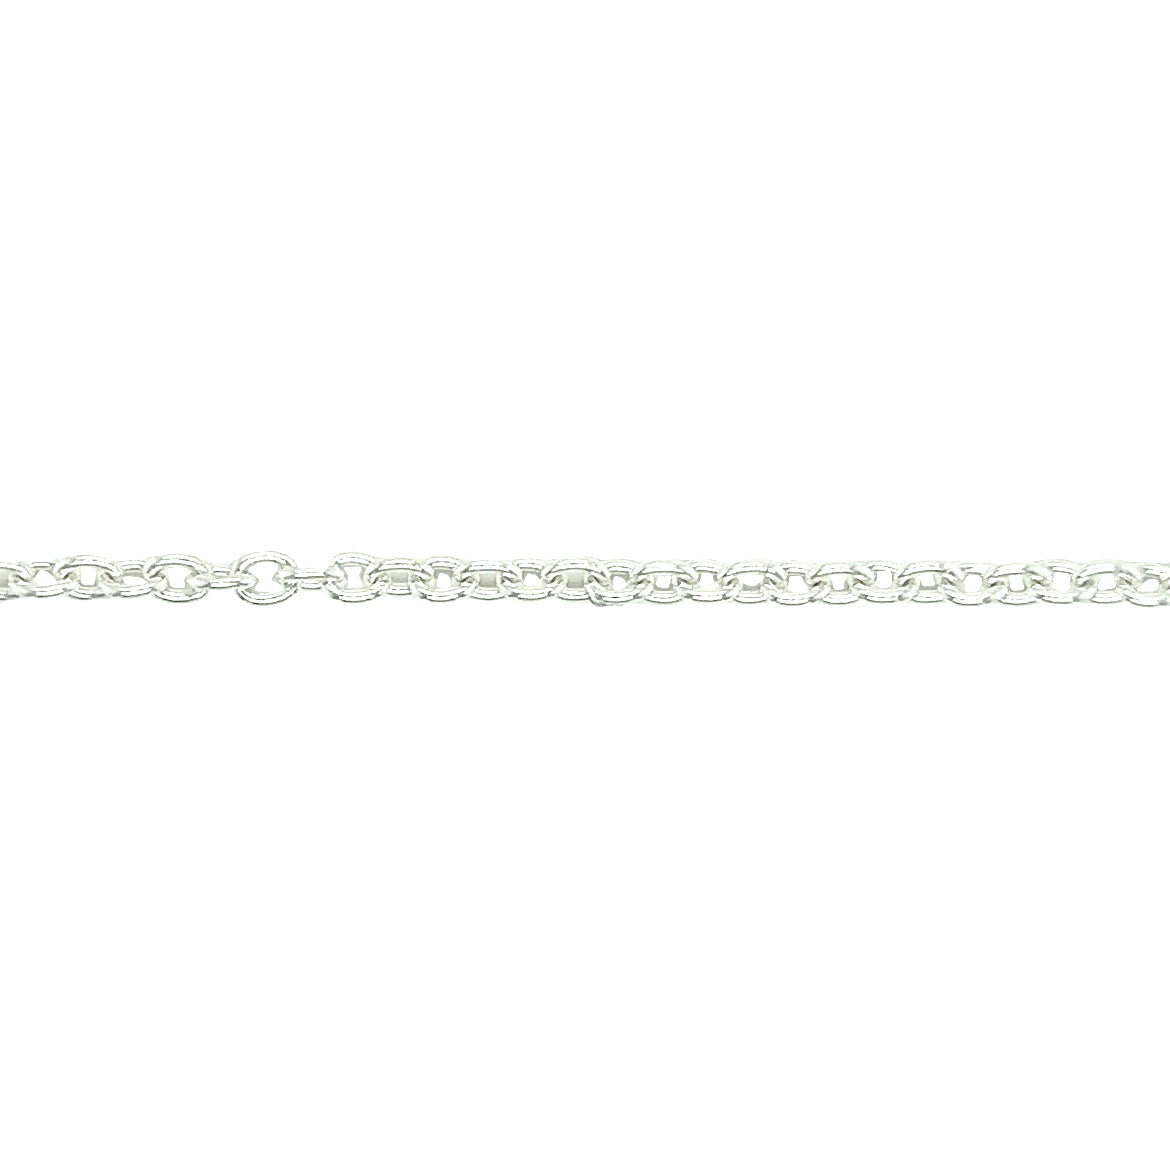 Cable Chain 2.75mm with 24in of Length in Sterling Silver Chain View